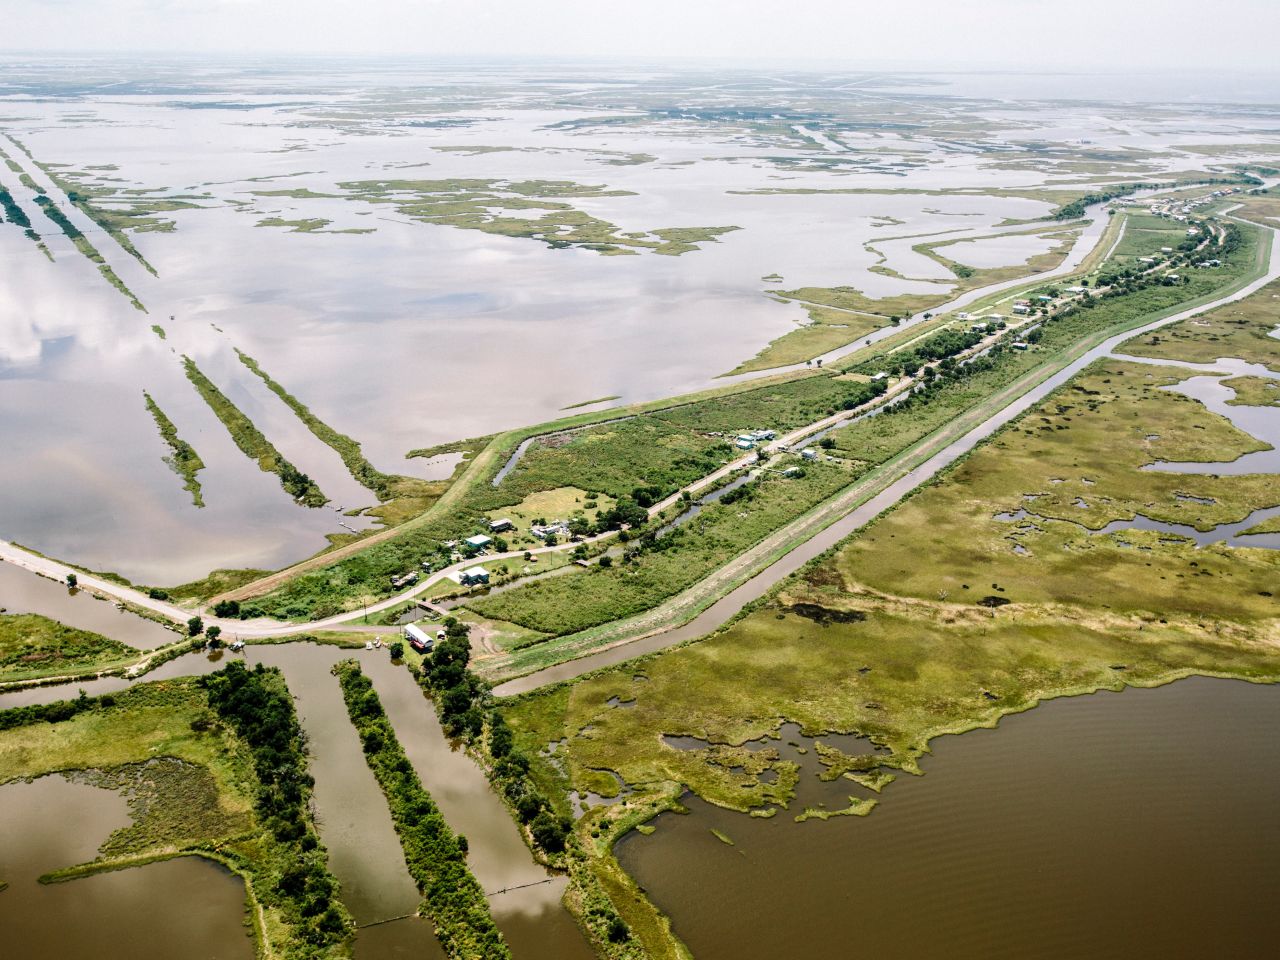 The community of Isle de Jean Charles, Louisiana, shown here in 2015, is disappearing in part because of poor river management and climate change.